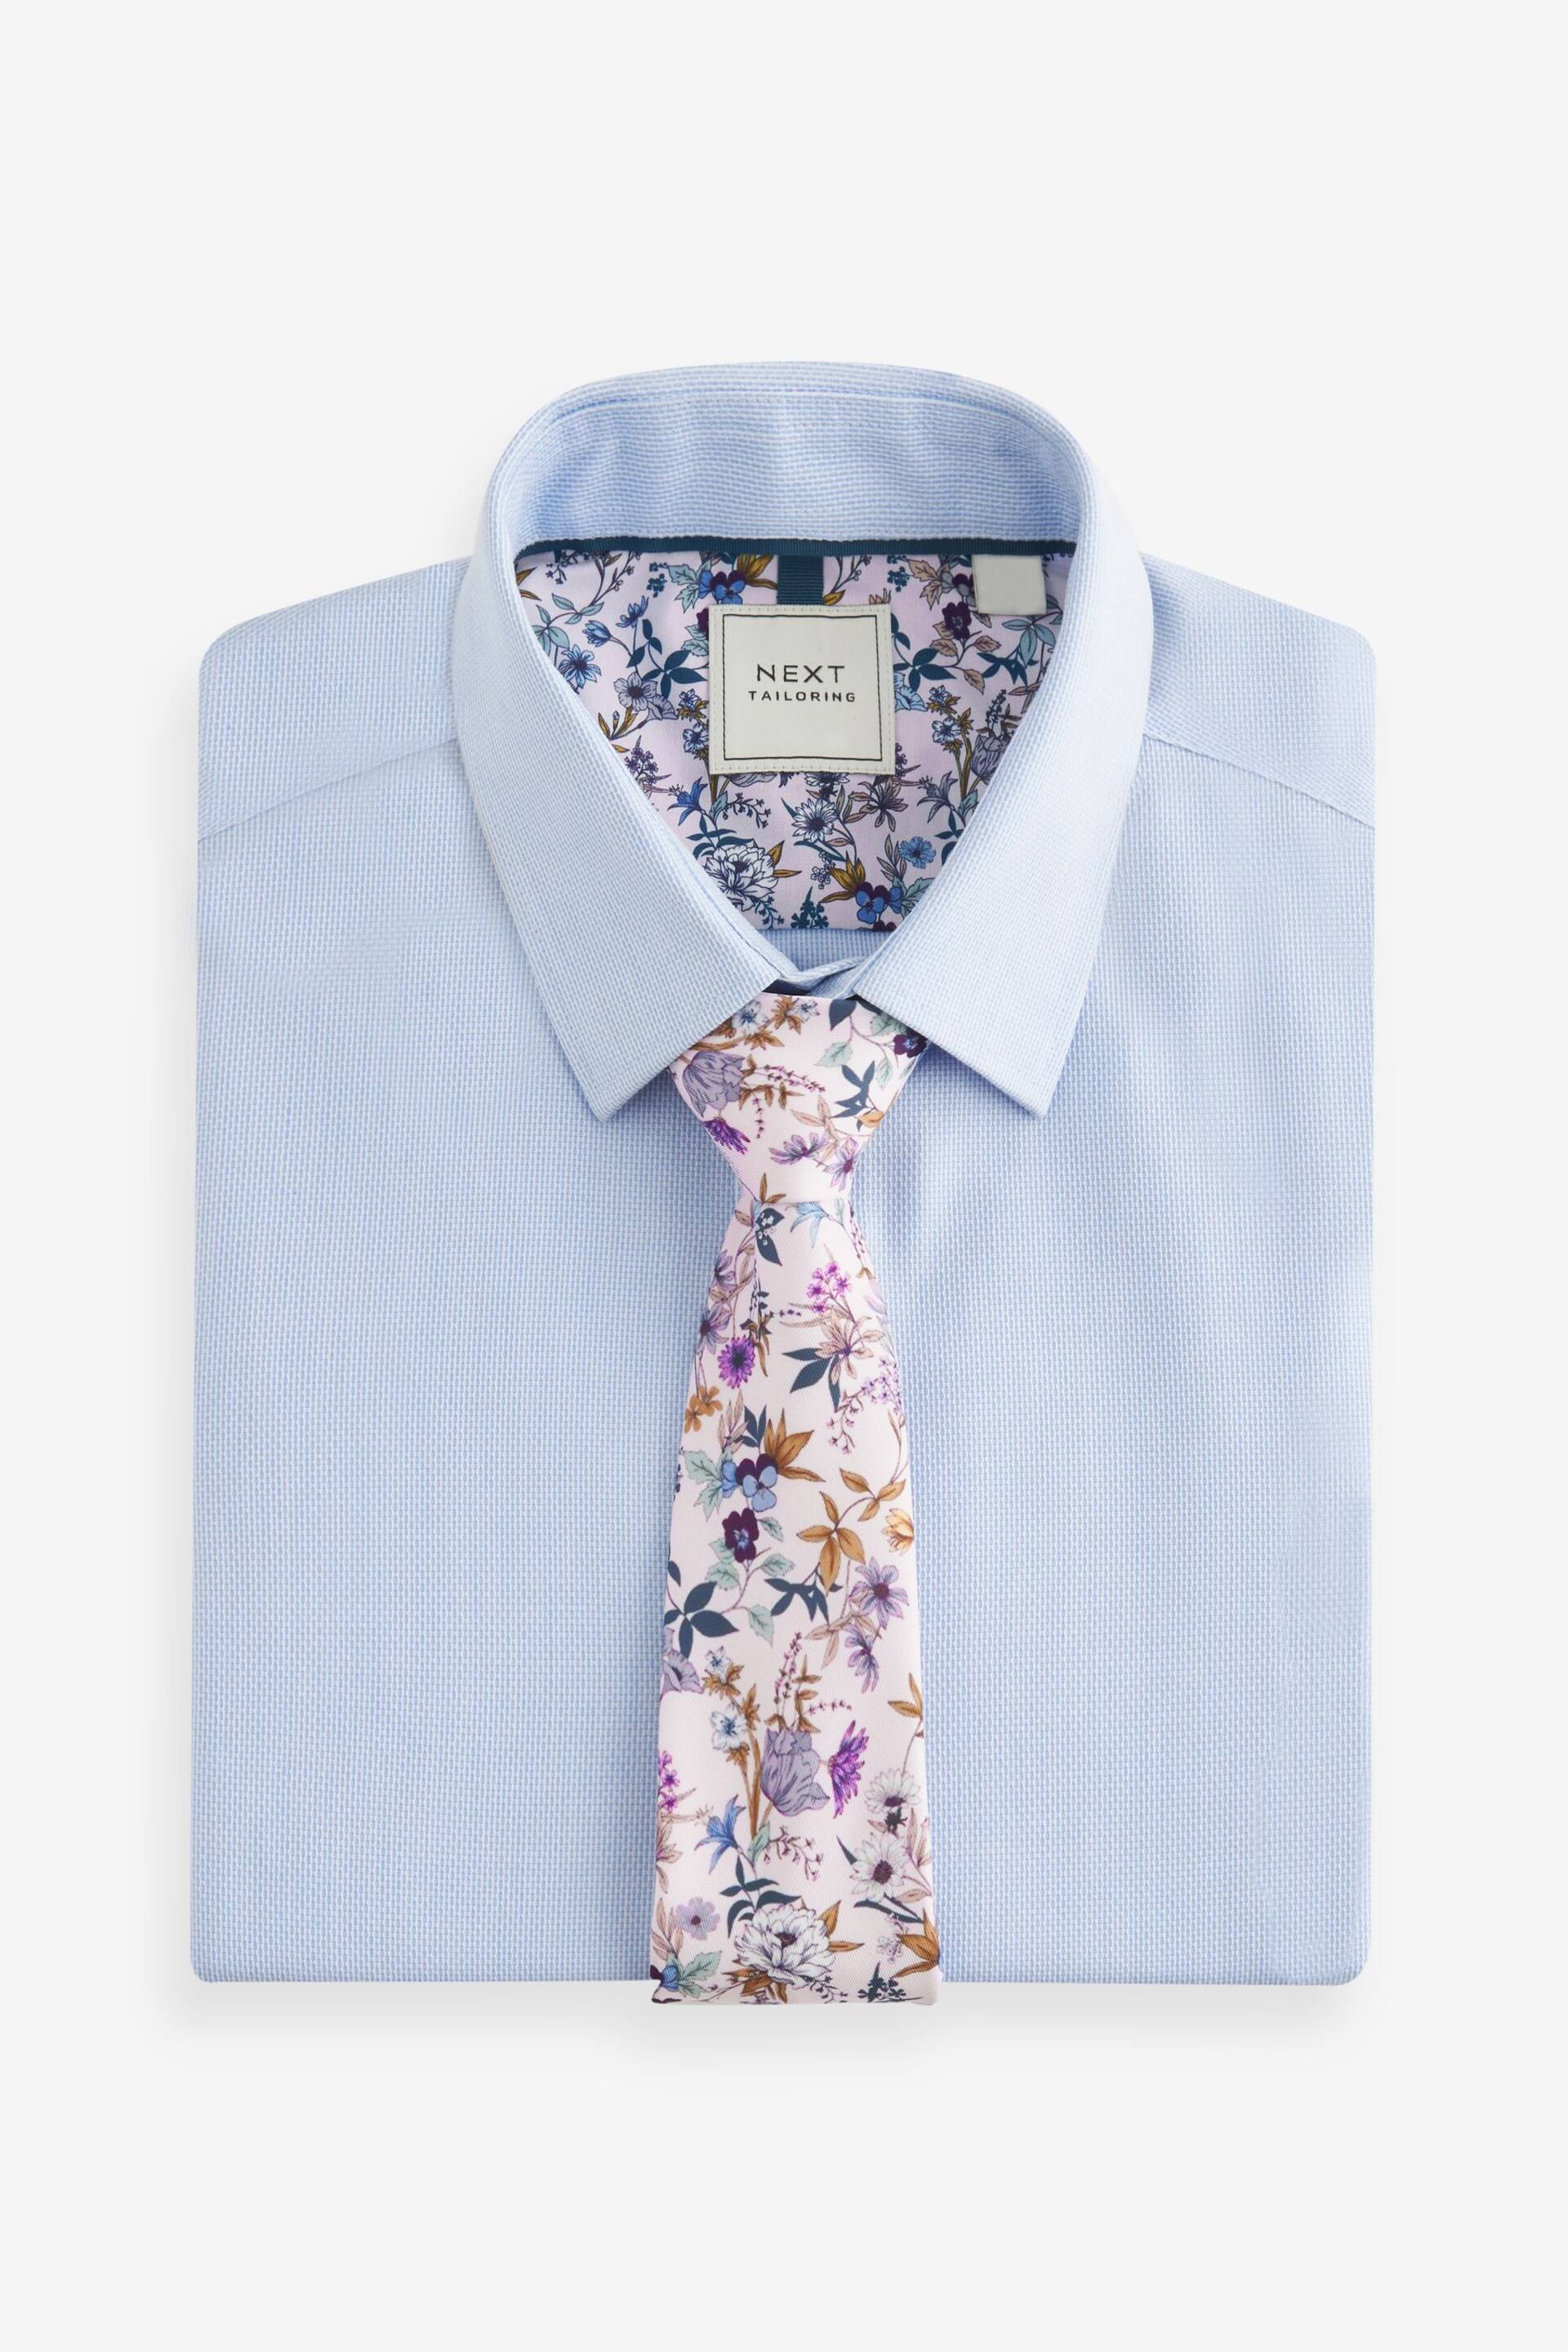 Light Blue/Light Pink Floral Occasion Shirt And Tie Pack - Image 7 of 7